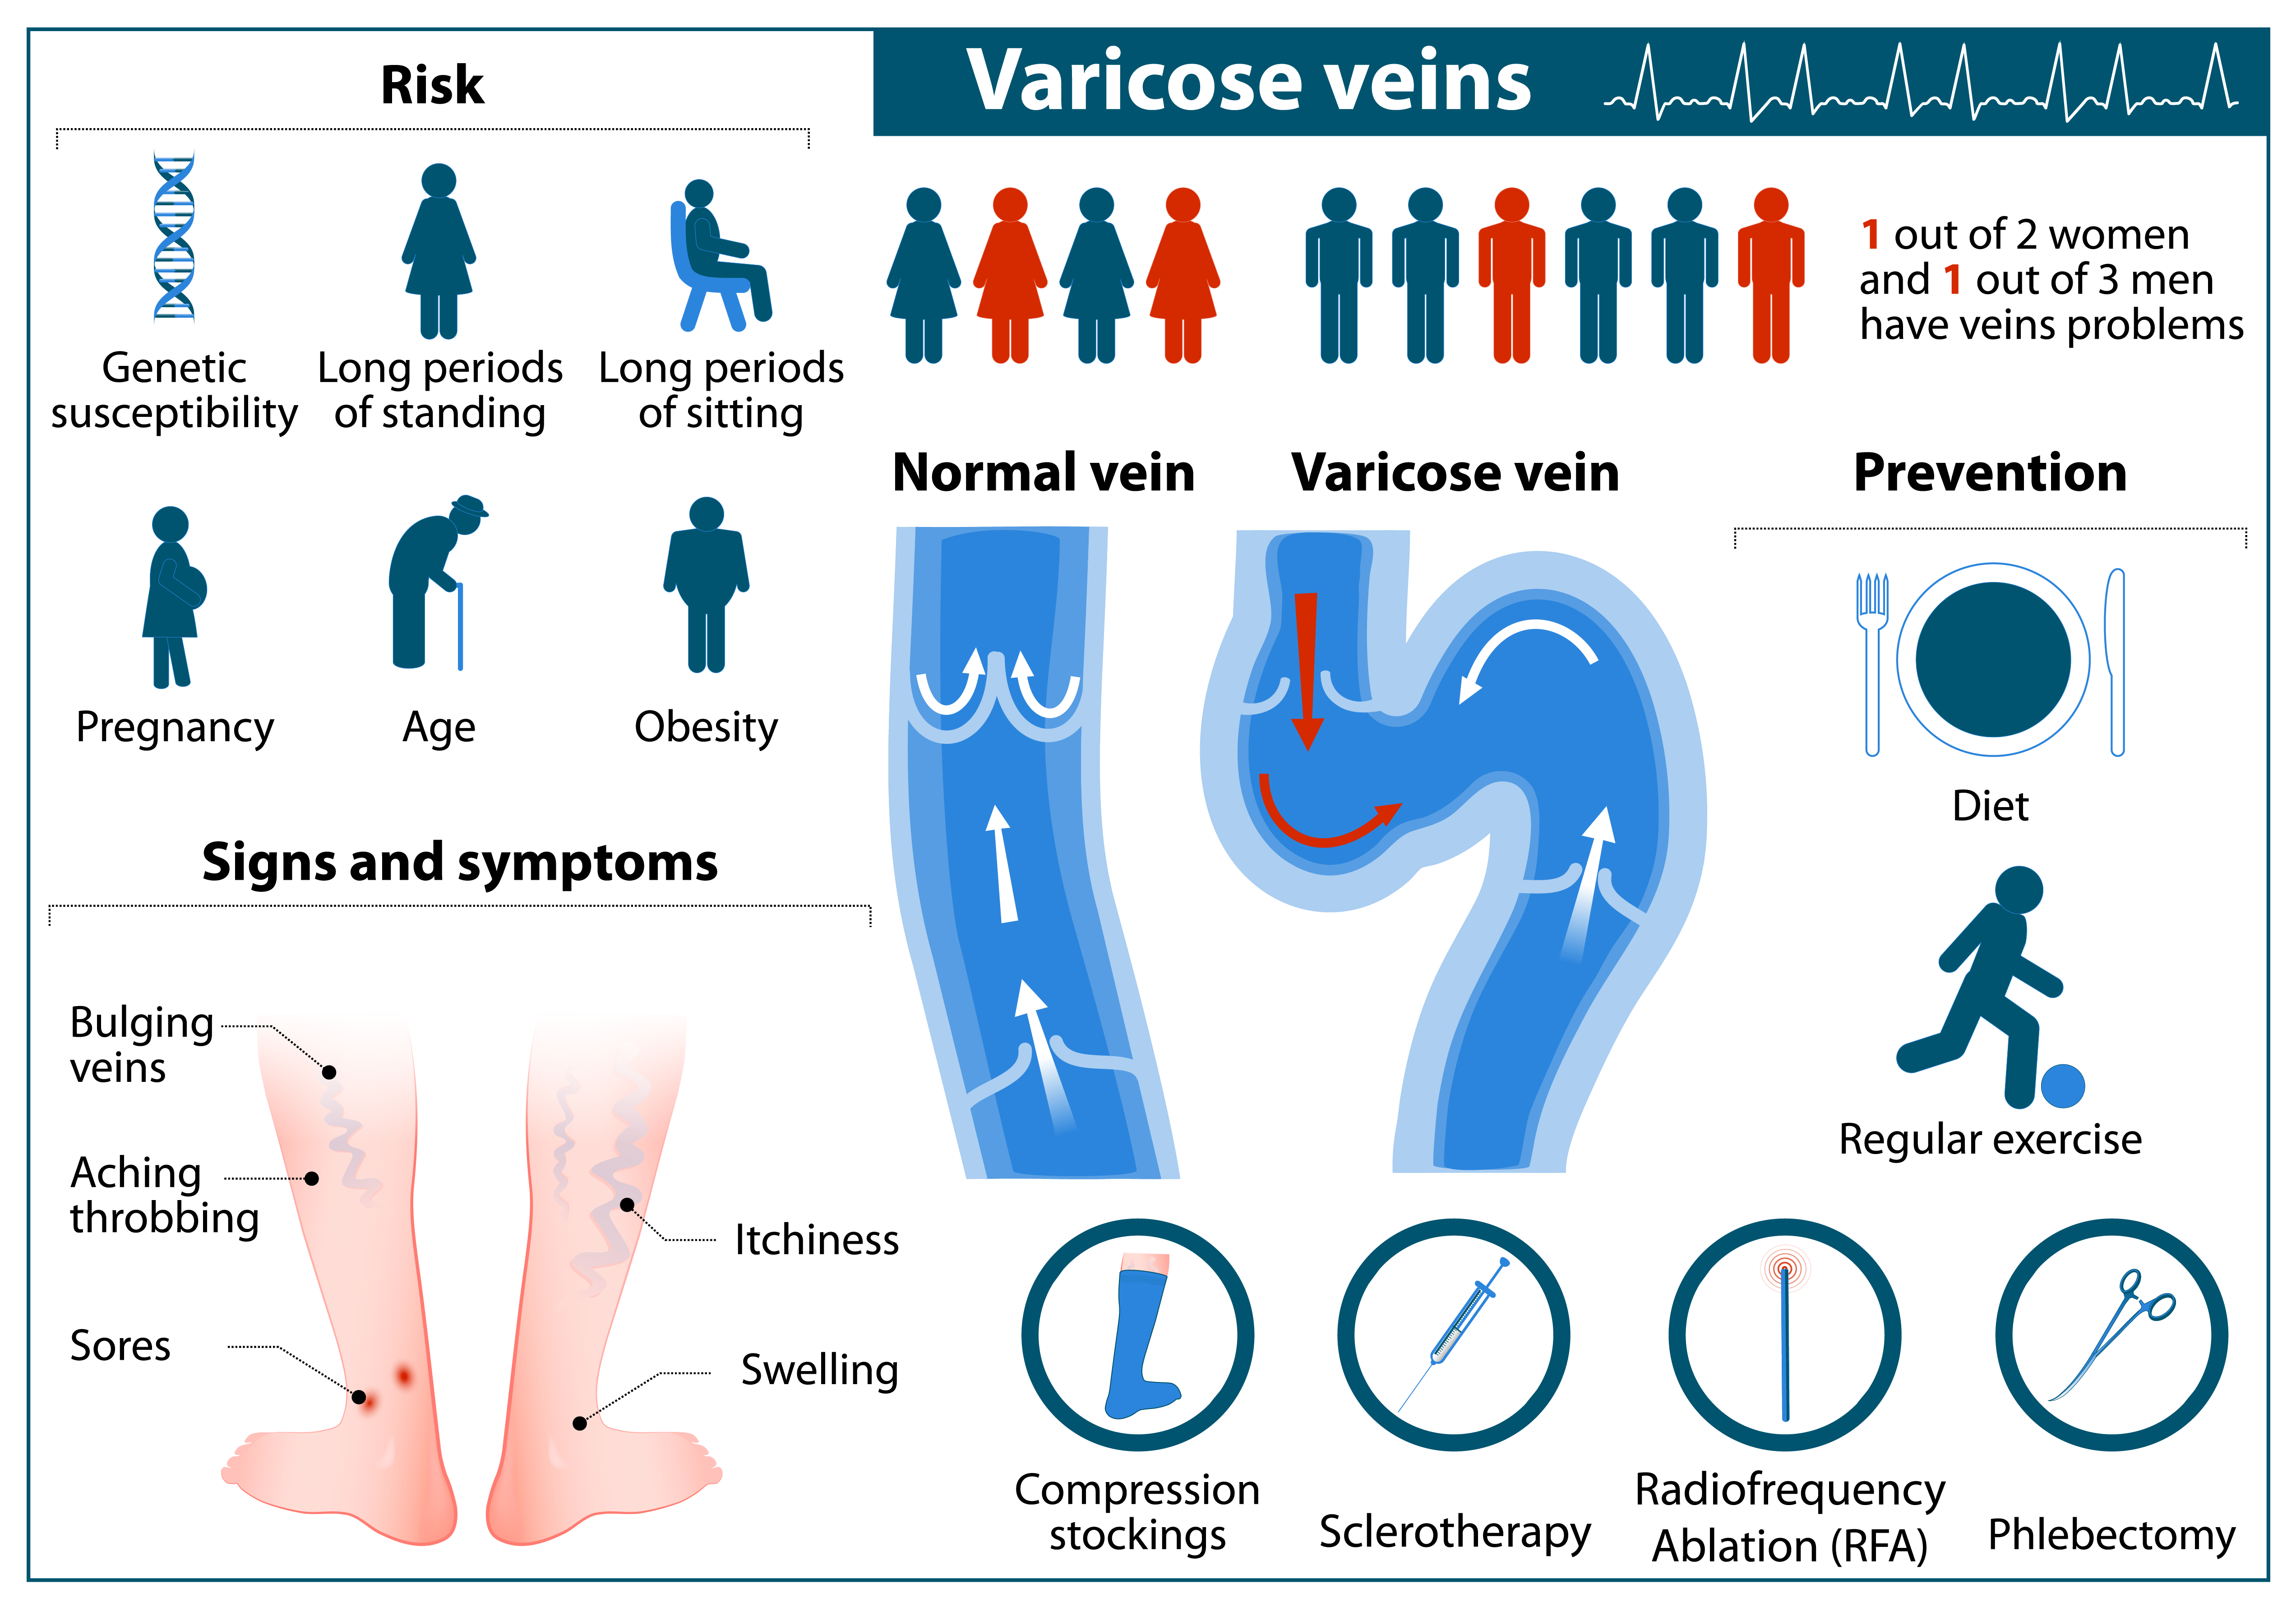 Varicose Veins Diagram: Risk, Signs and Symptoms, Treatments, Prevention